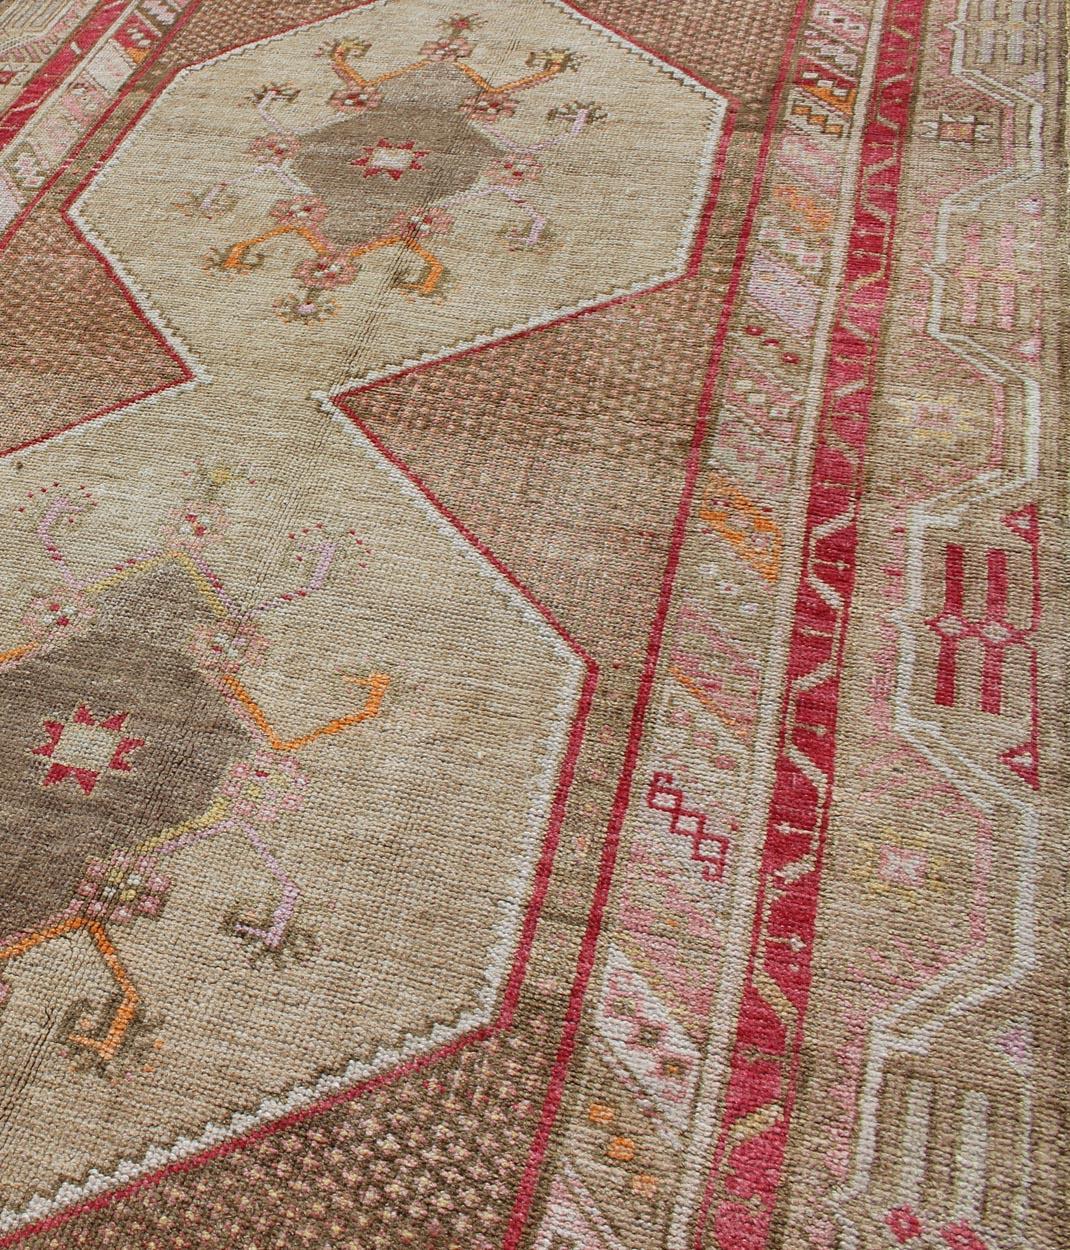 Turkish Oushak Gallery Rug with Multi-Medallion Design in Earth Tones and Red In Good Condition For Sale In Atlanta, GA